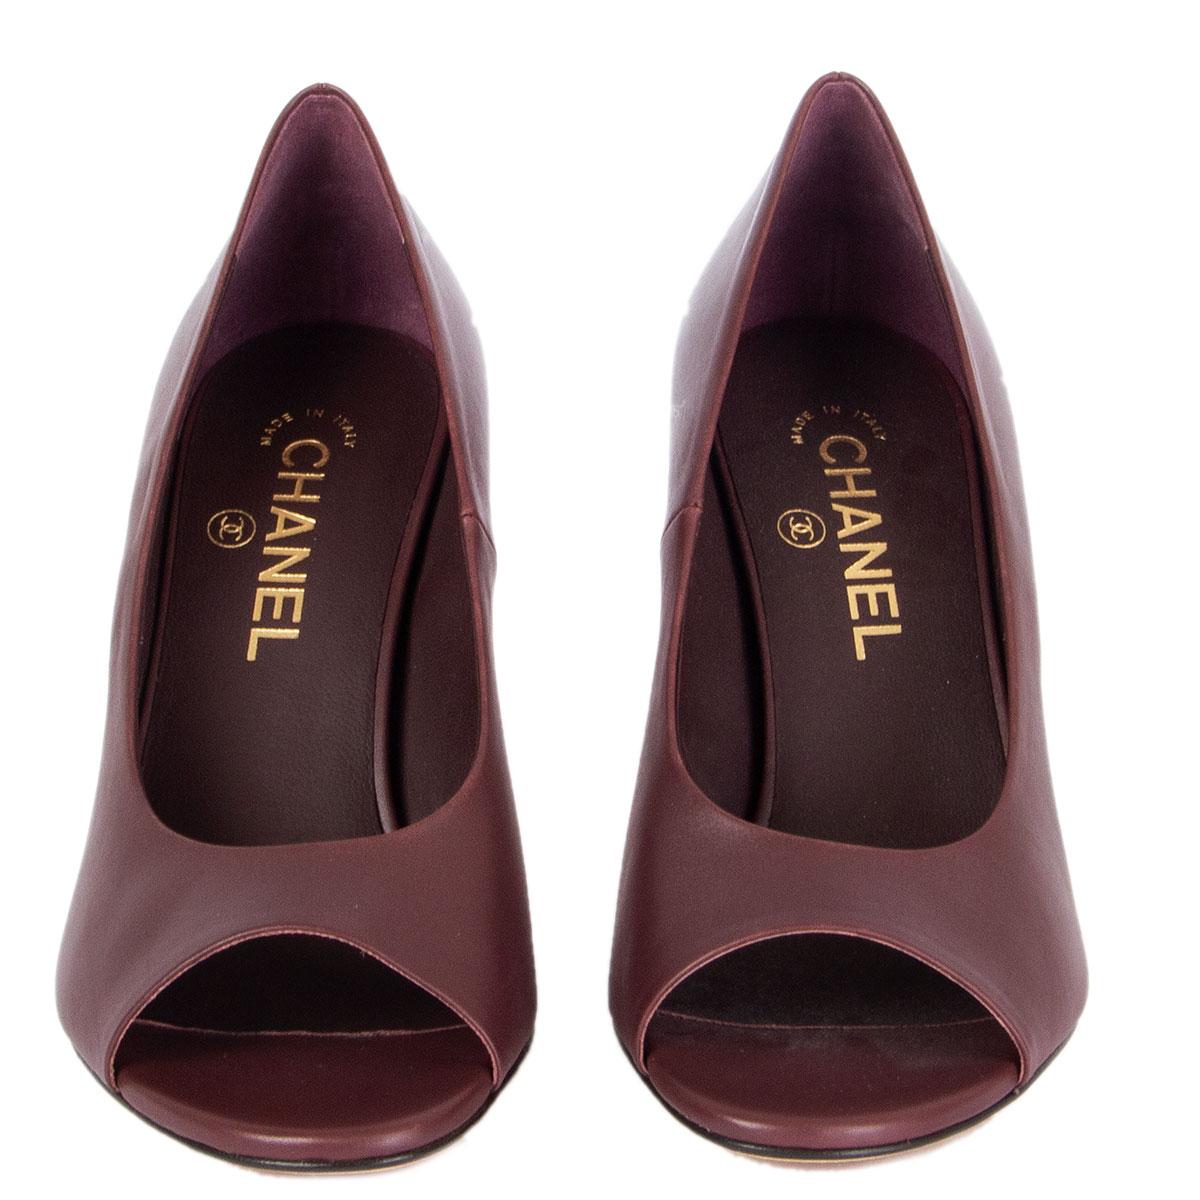 100% authentic Chanel open-toe pumps in burgundy smooth leather featuring gold-tone round chain-heel. Brand new. Come with dust bag. 

Imprinted Size	38.5
Shoe Size	38.5
Inside Sole	24.5cm (9.6in)
Width	7.5cm (2.9in)
Heel	8.5cm